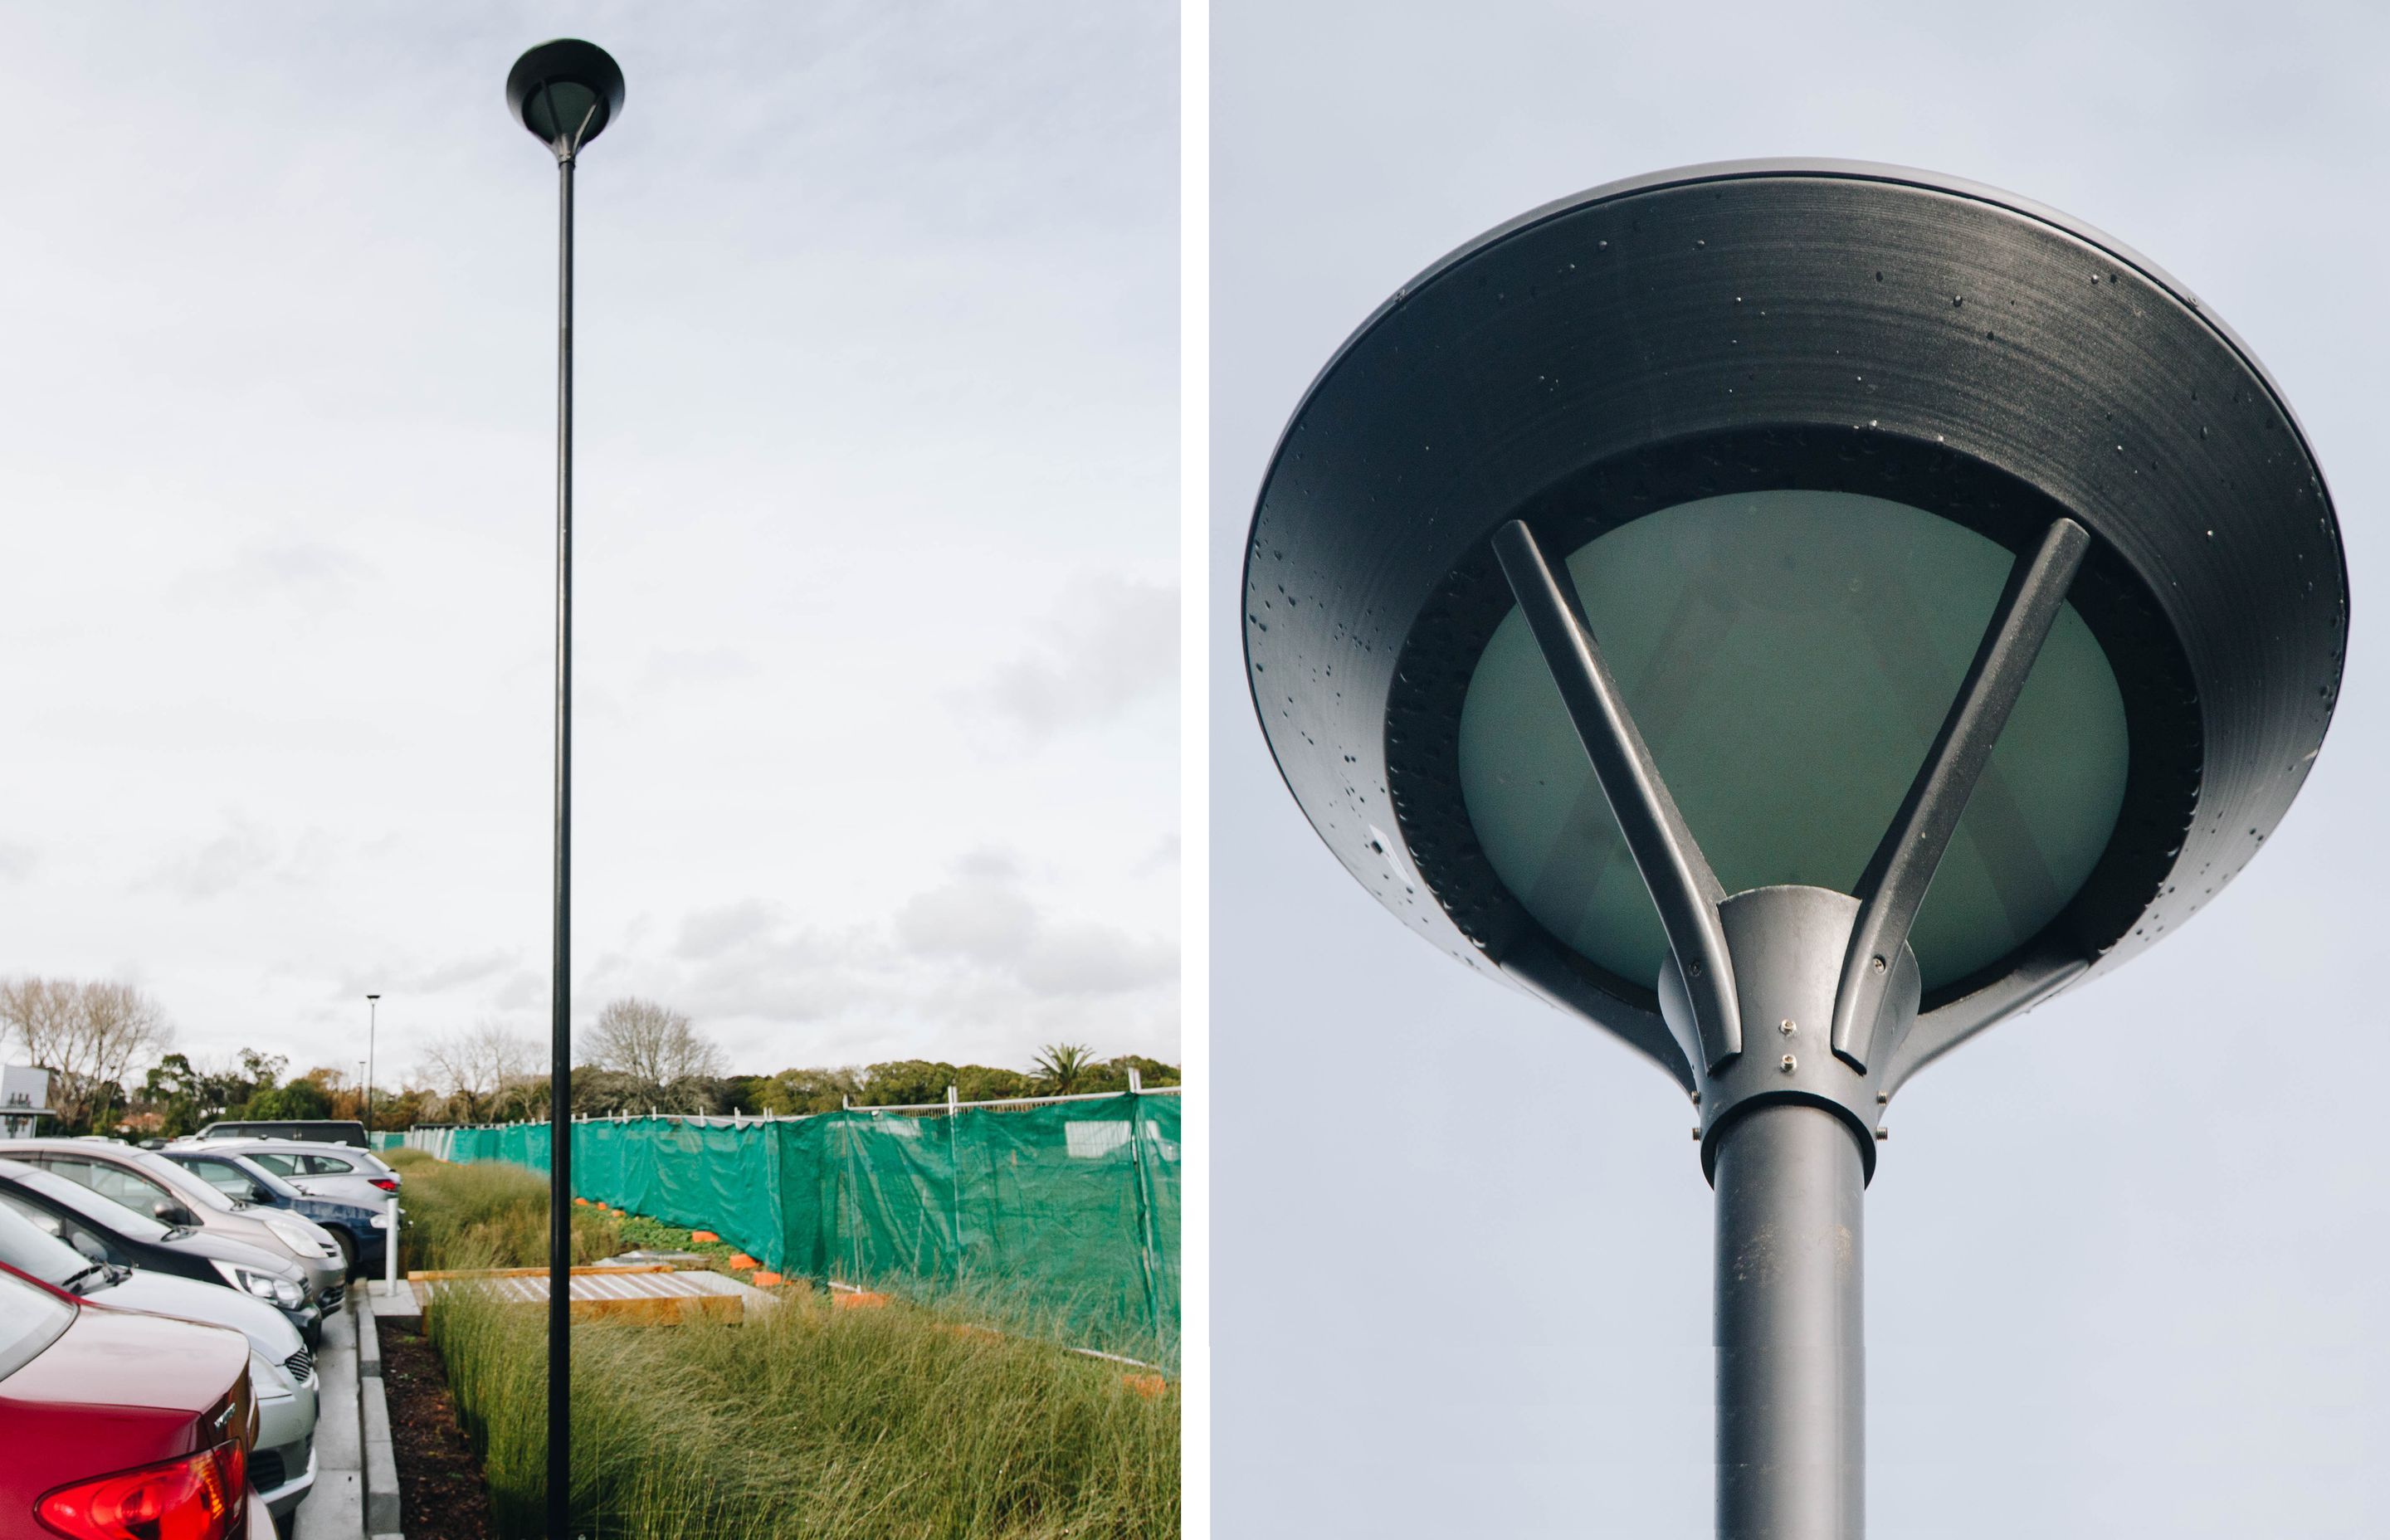 A high-performance LED luminaire, the Sentry Pole Top 008 can replace traditional lighting sources and is suitable for evacuation assembly point illumination.